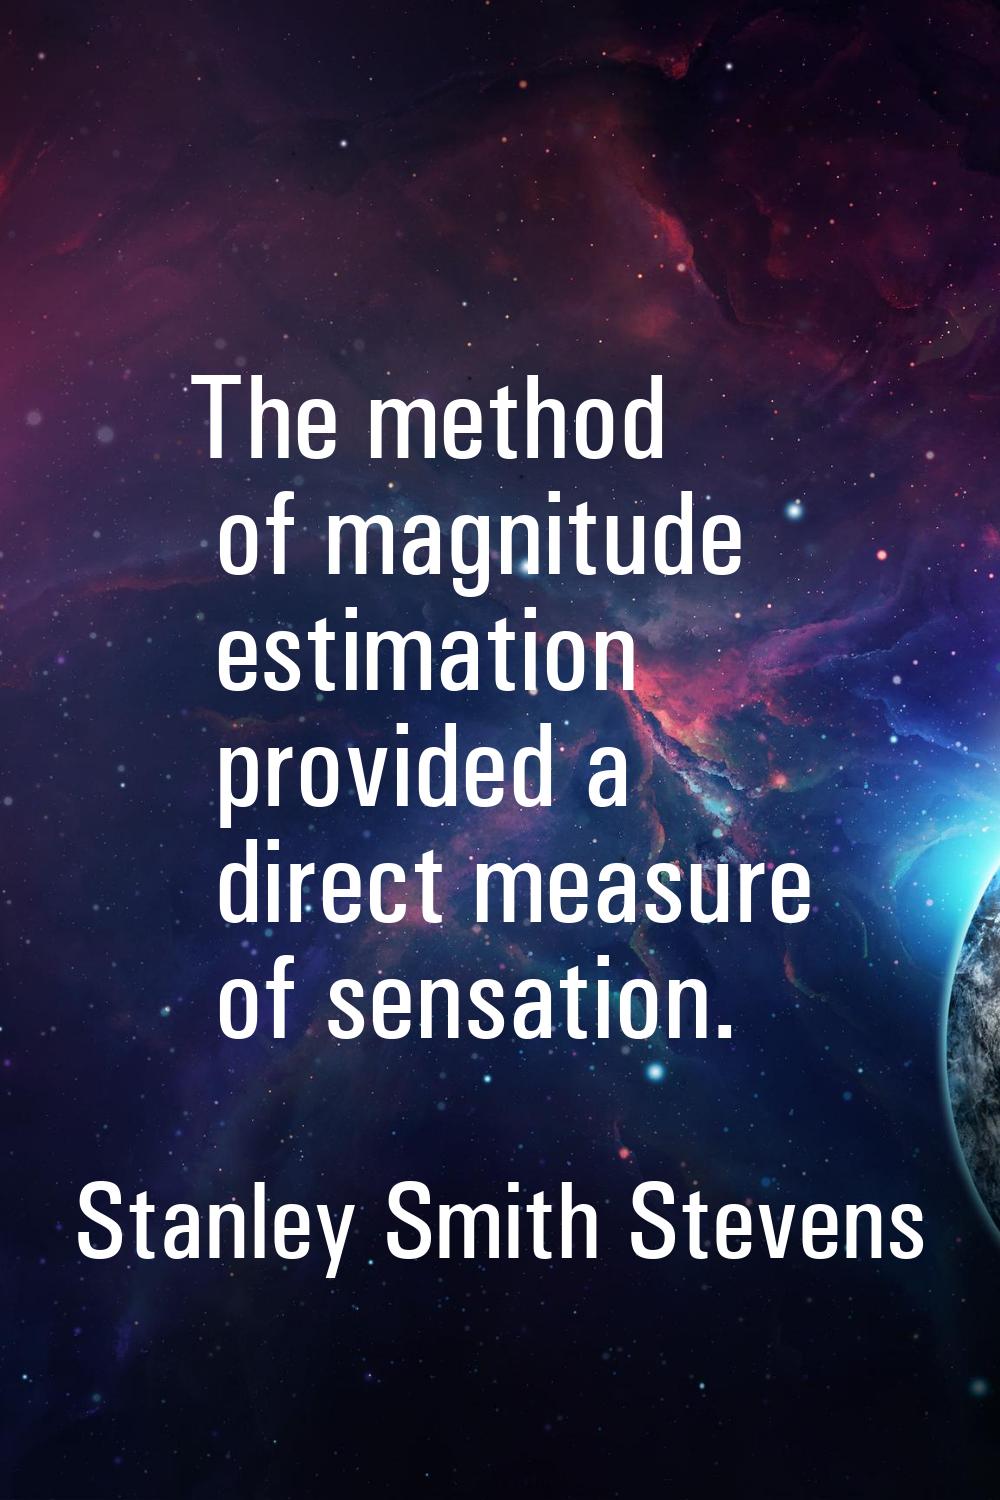 The method of magnitude estimation provided a direct measure of sensation.